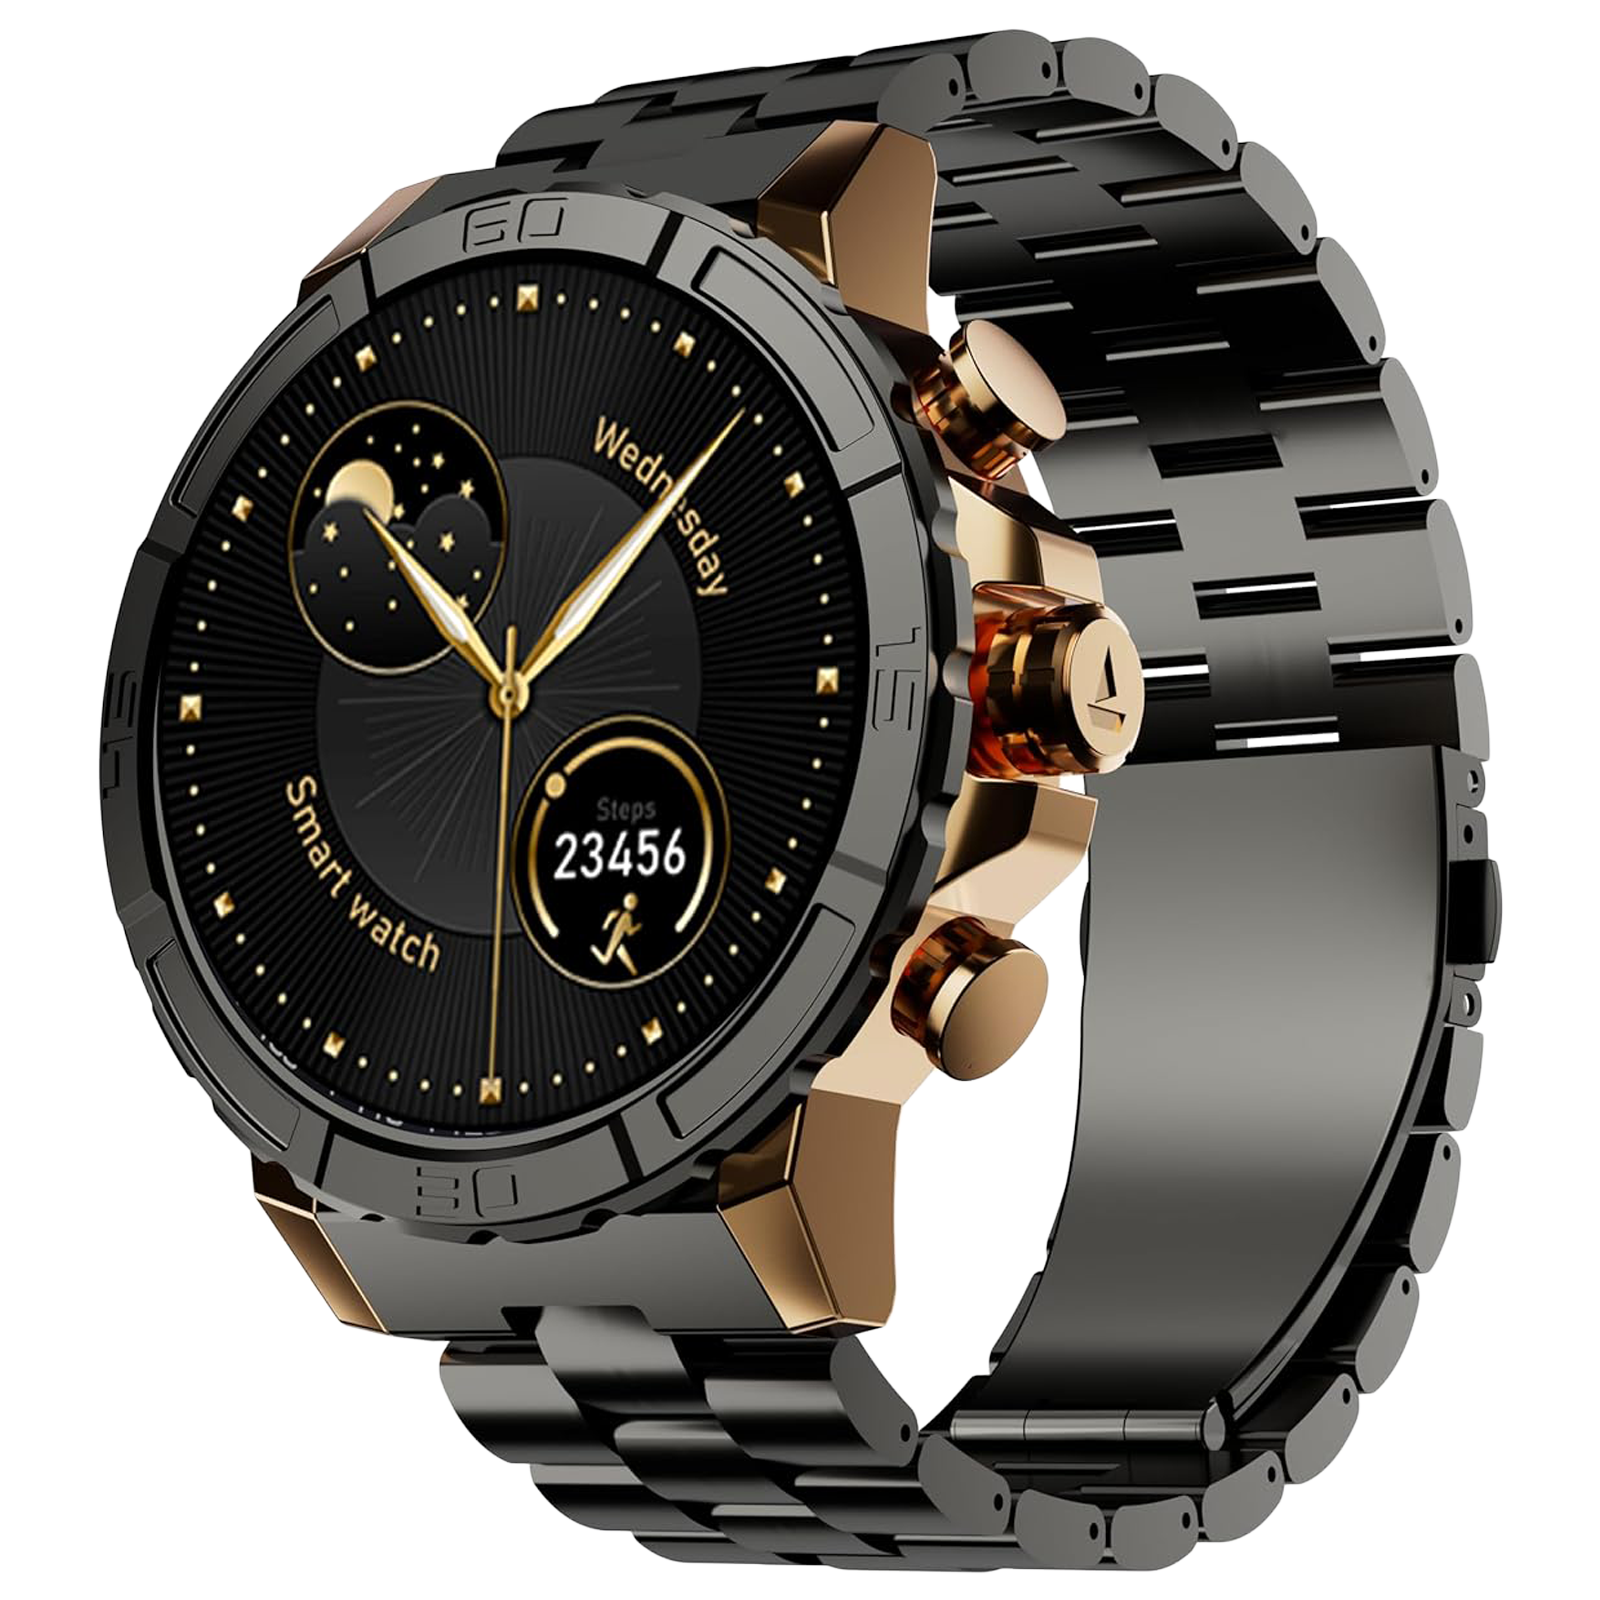 boAt Enigma X700 Smartwatch with Bluetooth Calling (38mm AMOLED Display, IP67 Sweat Resistant, Copper Black Strap)